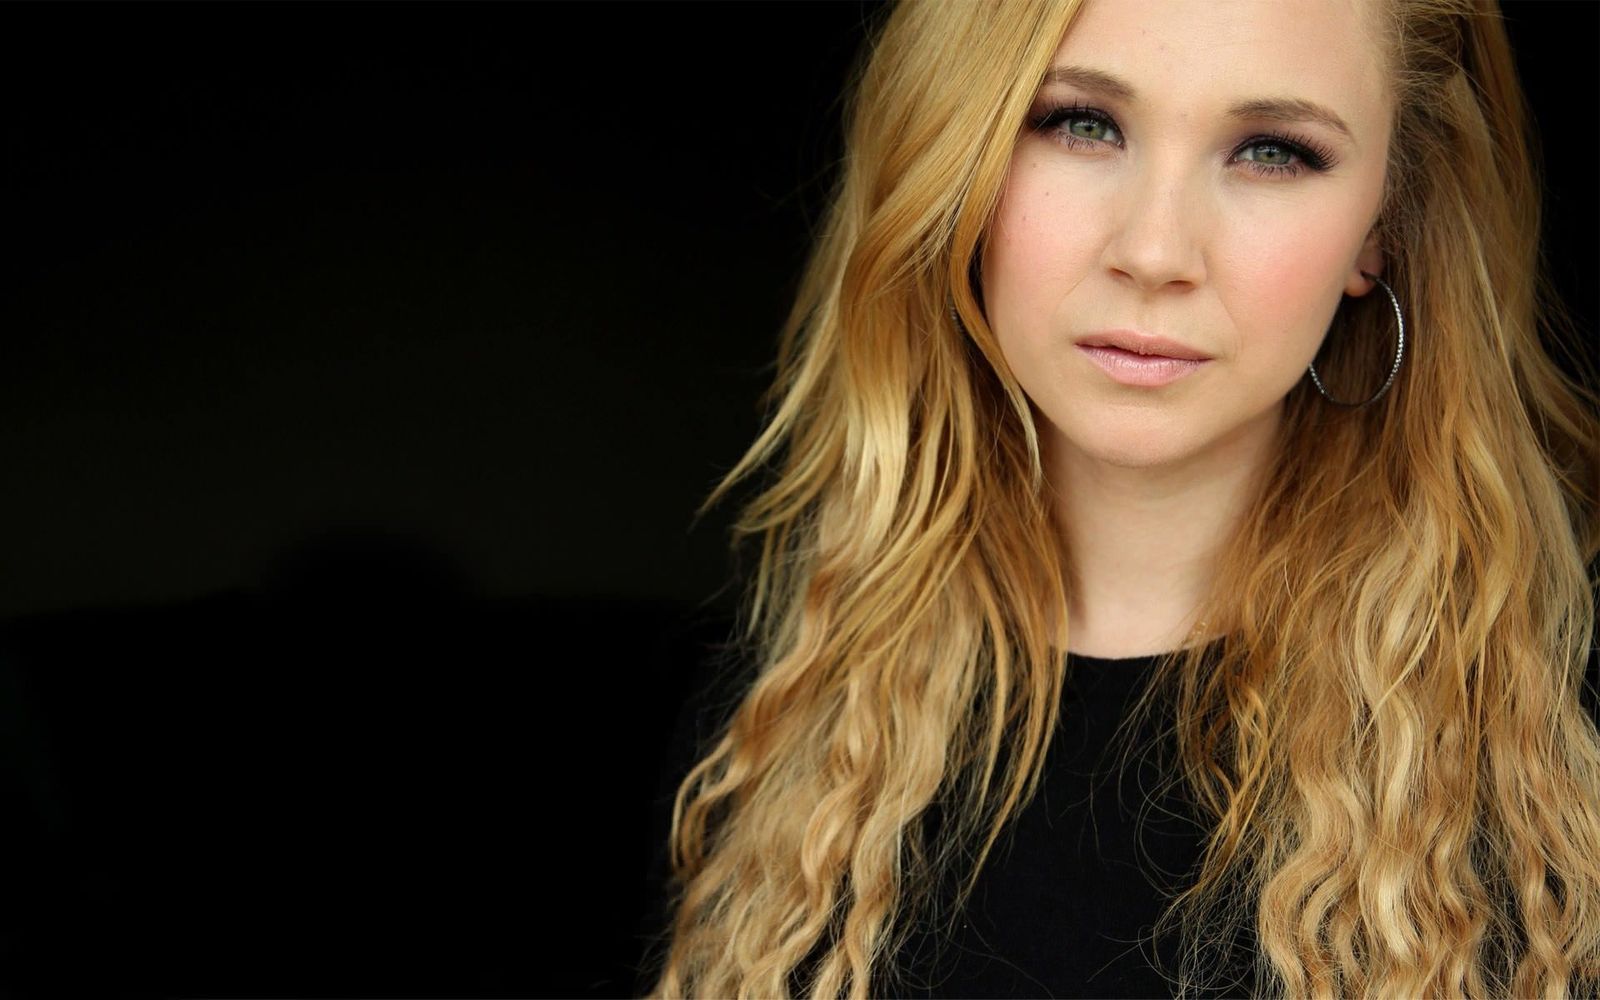 Juno Temple Wishes For A Lead Role in A Biopic